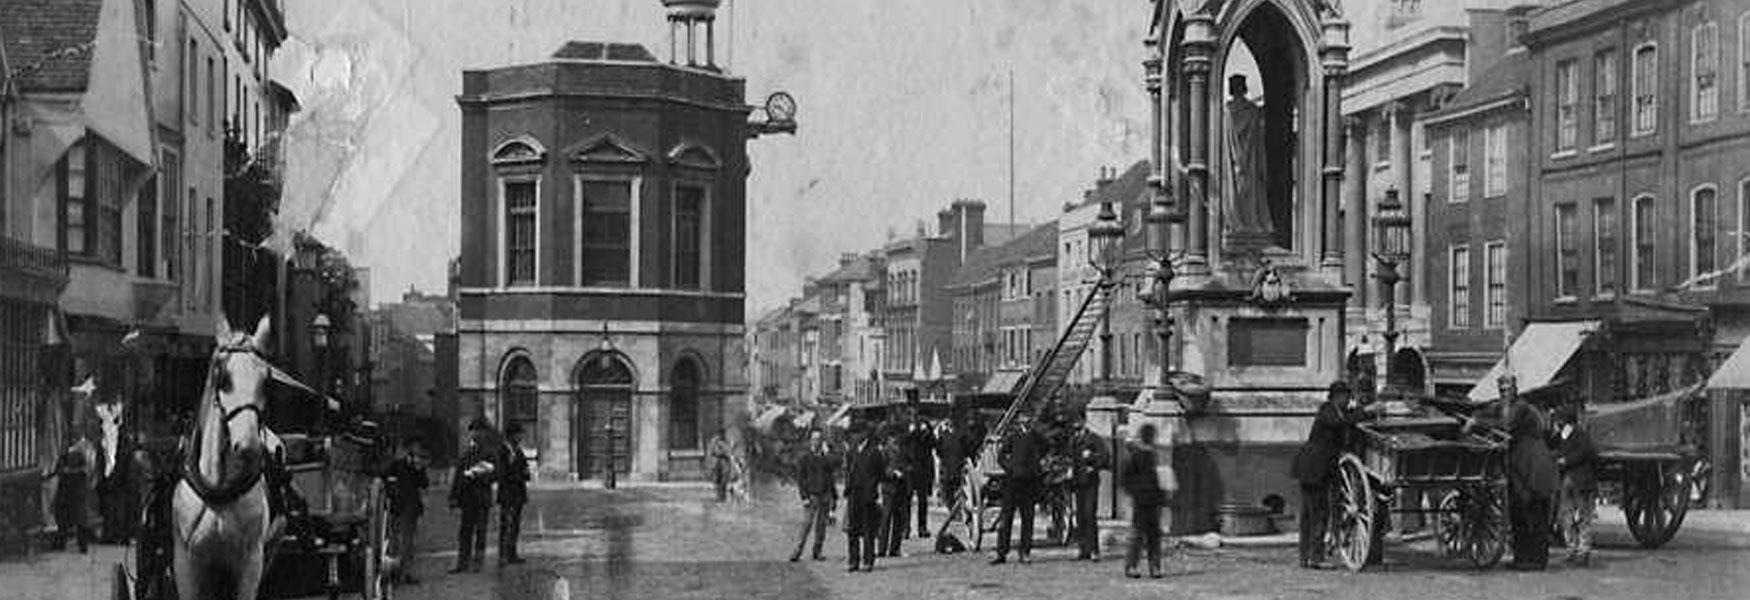 Old photo of horse drawn vehicles in the Upper High Street or High Town, now known as Jubilee Square